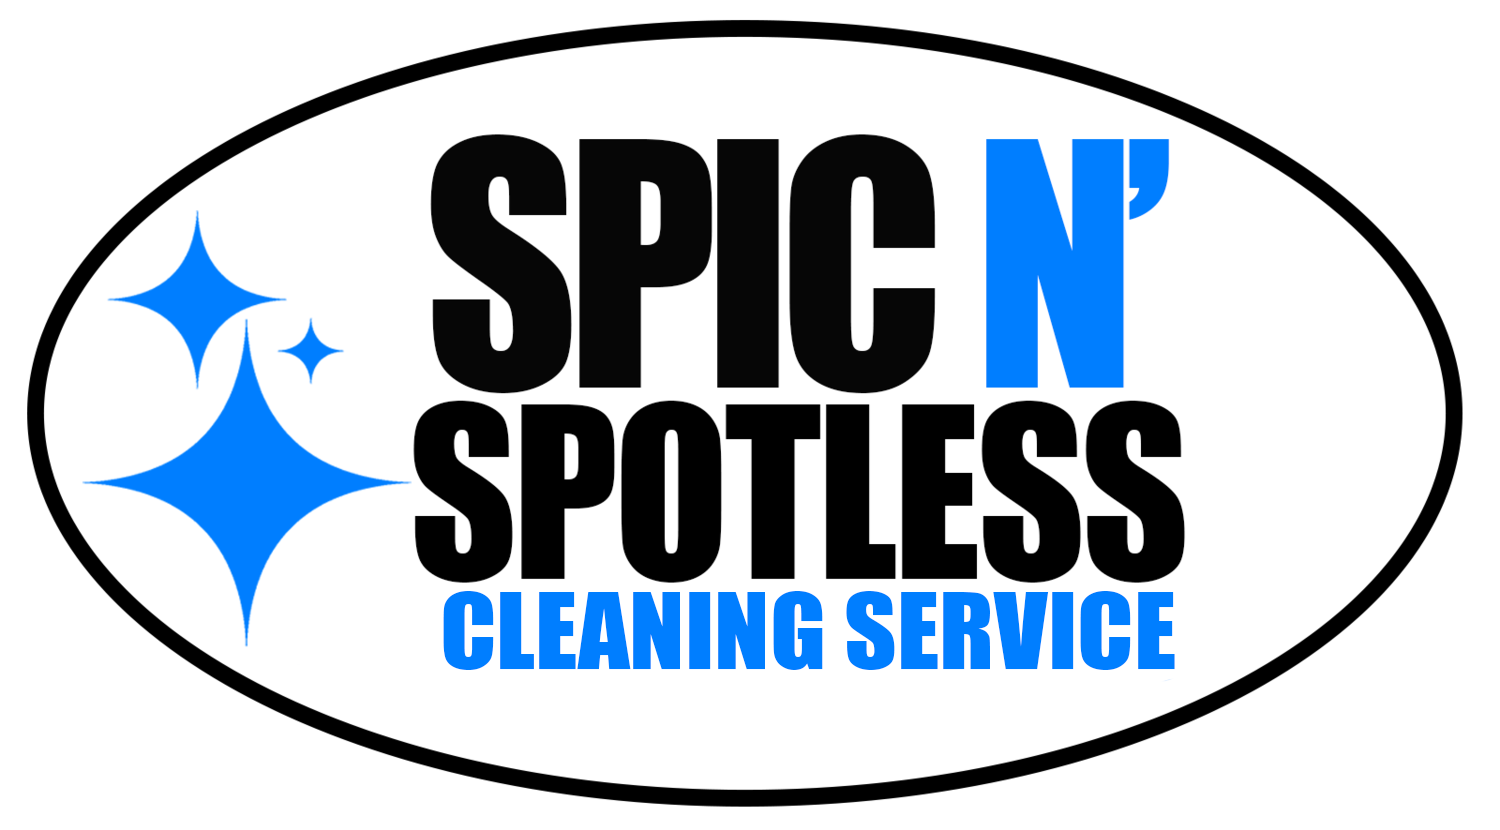 Spic N Spotless A Customer Friendly Cleaning Service in Baltimore